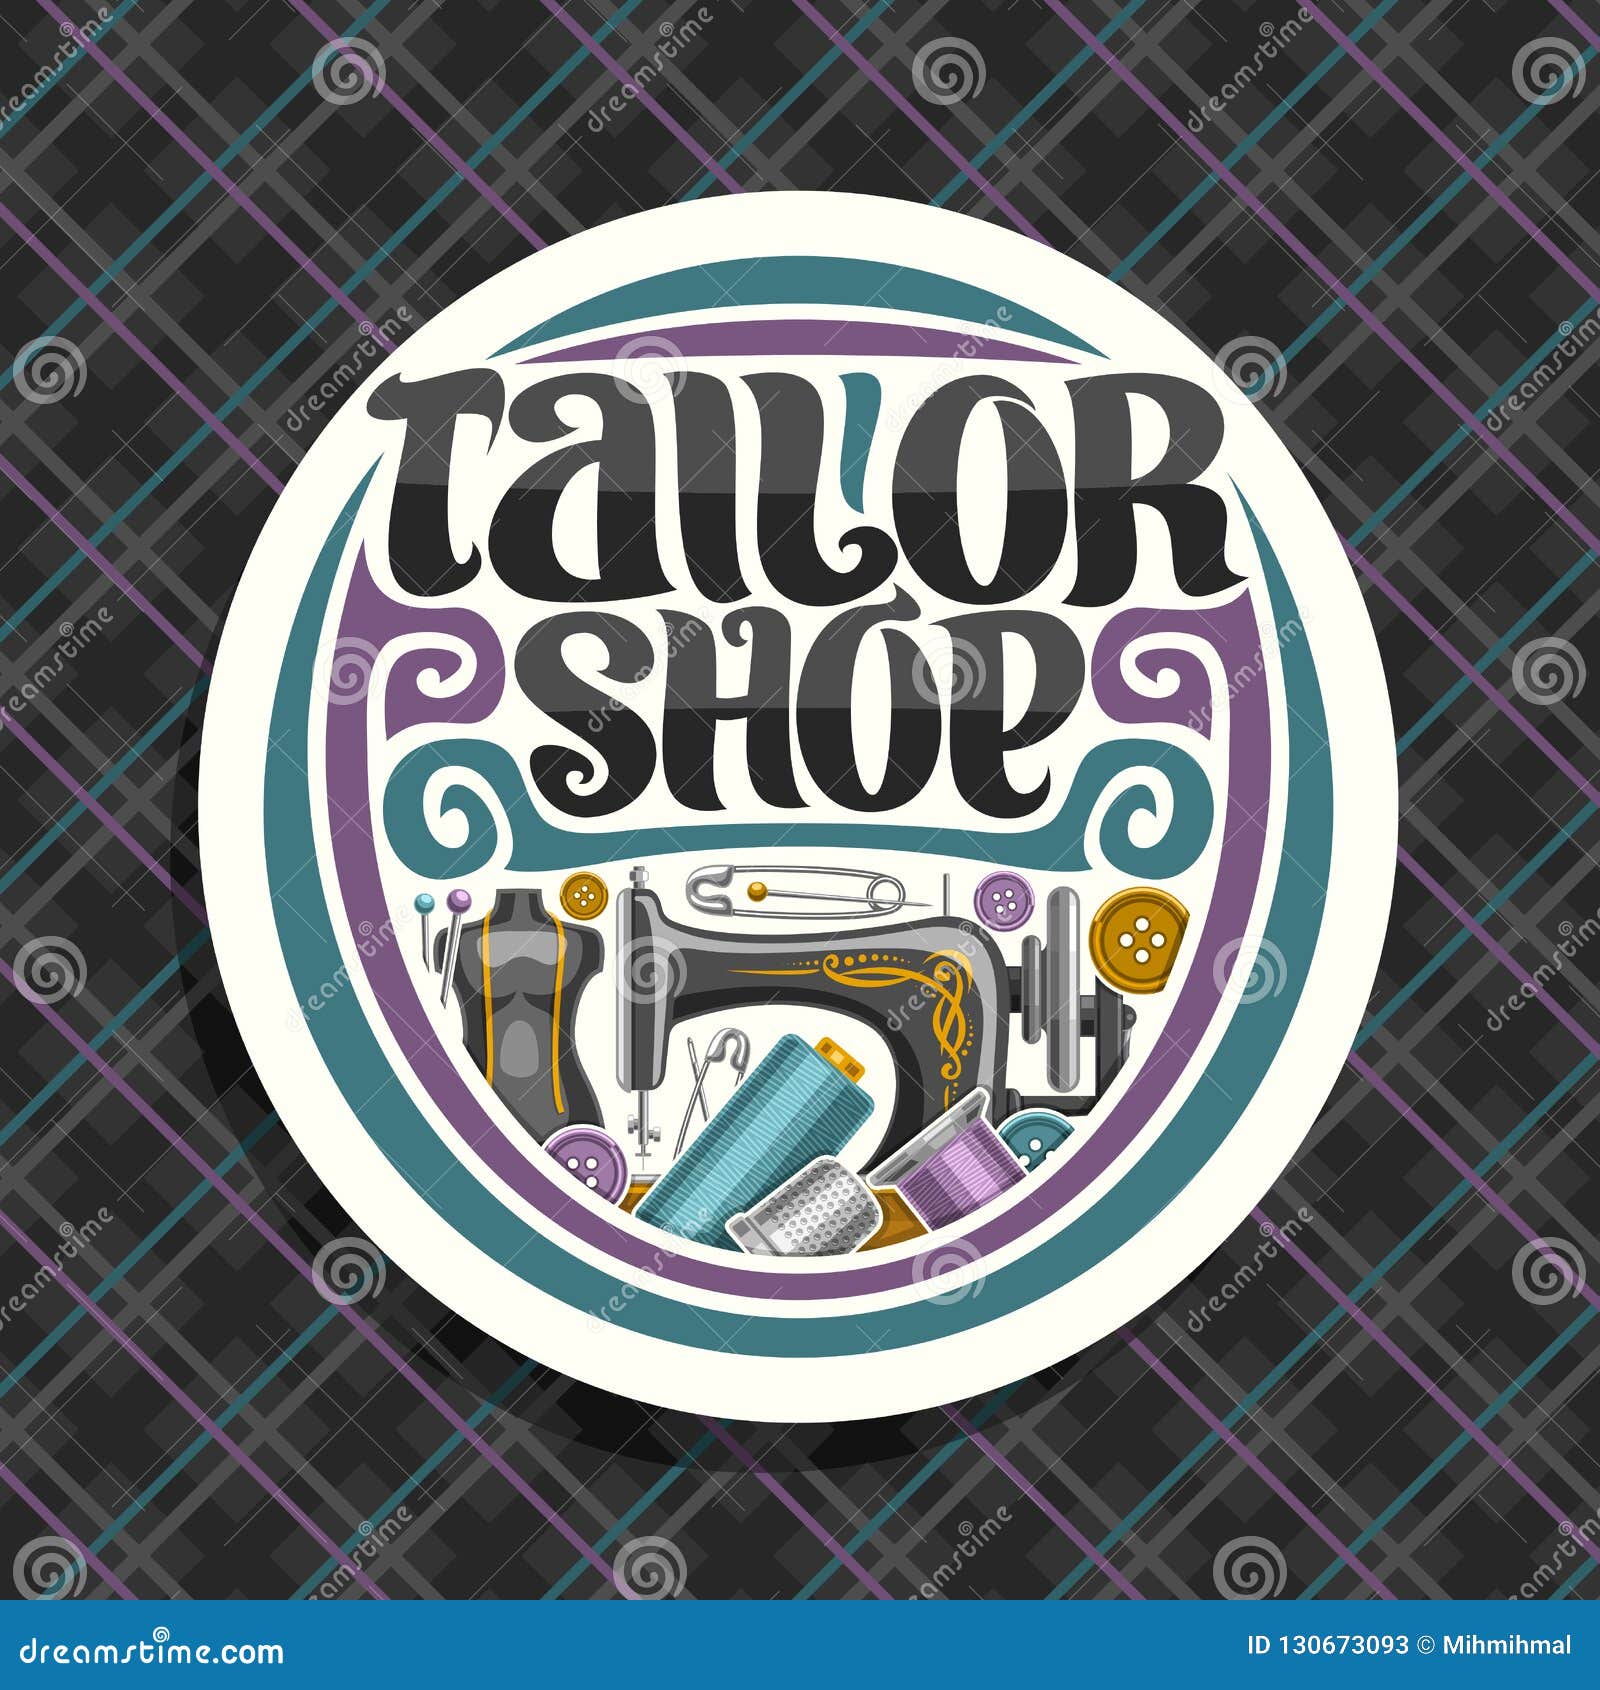 Vector Logo for Tailor Shop Stock Vector - Illustration of circle ...